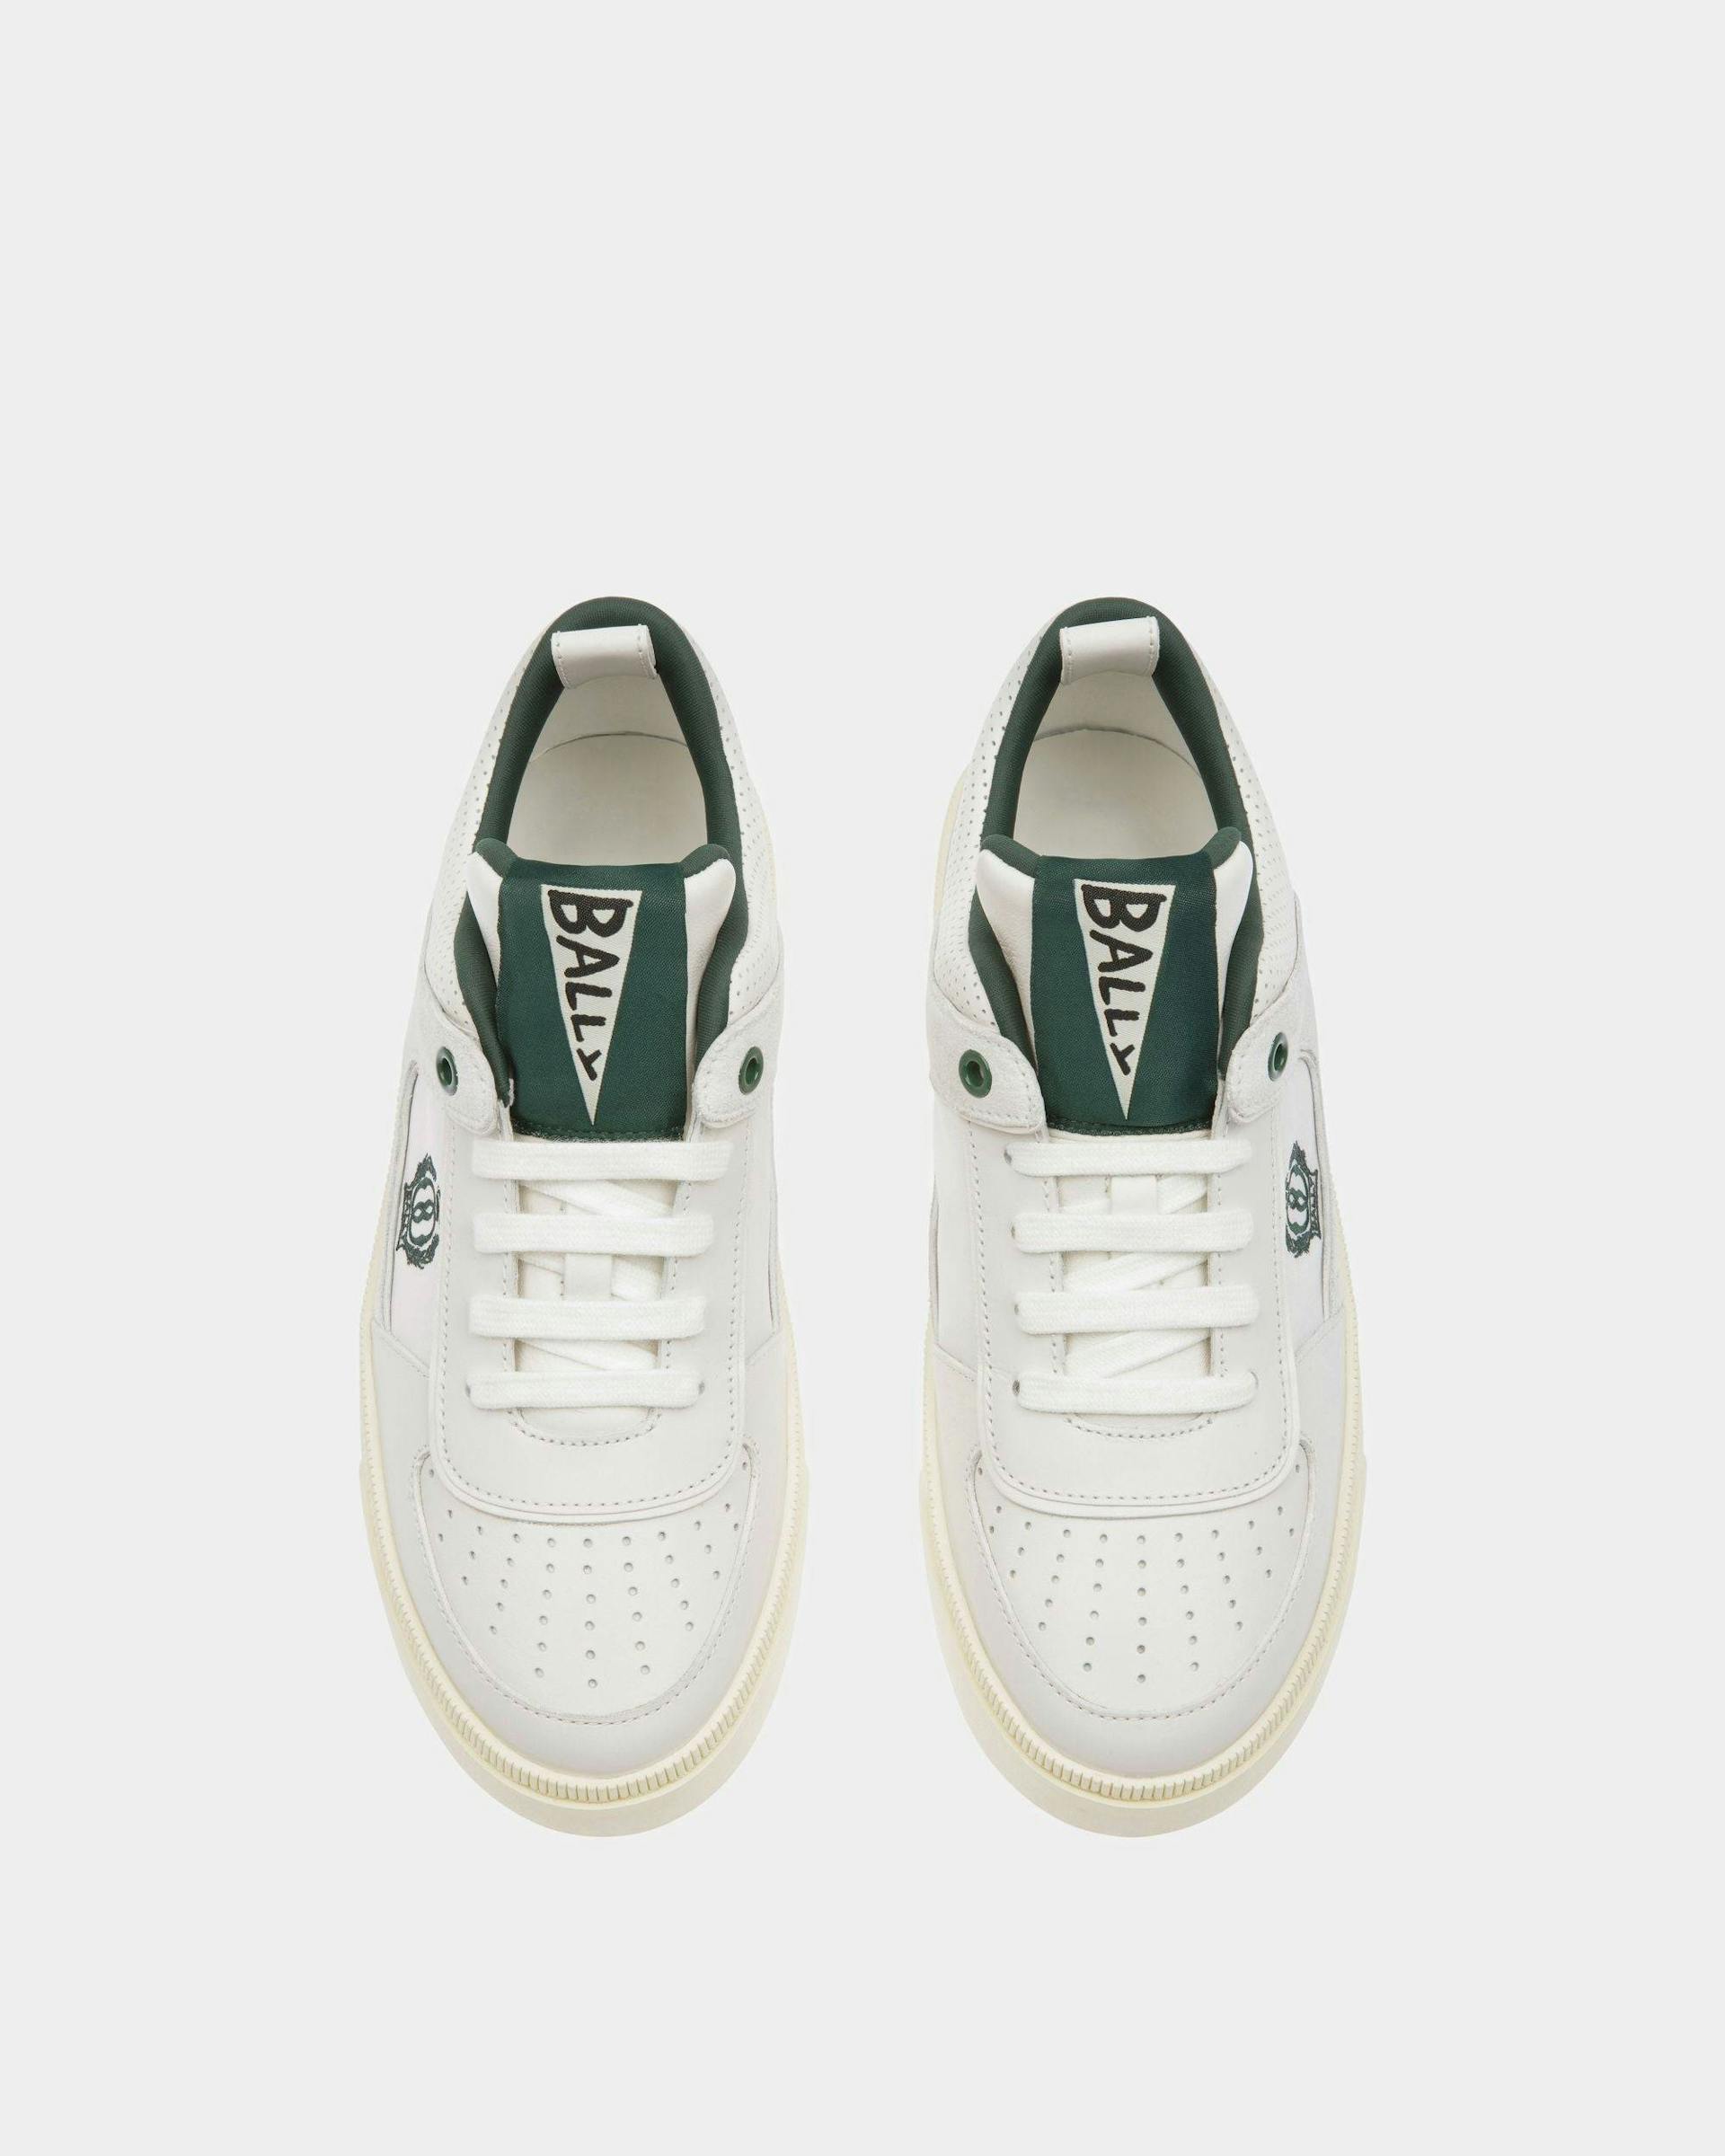 Raise Sneakers In White And Green Leather - Women's - Bally - 02